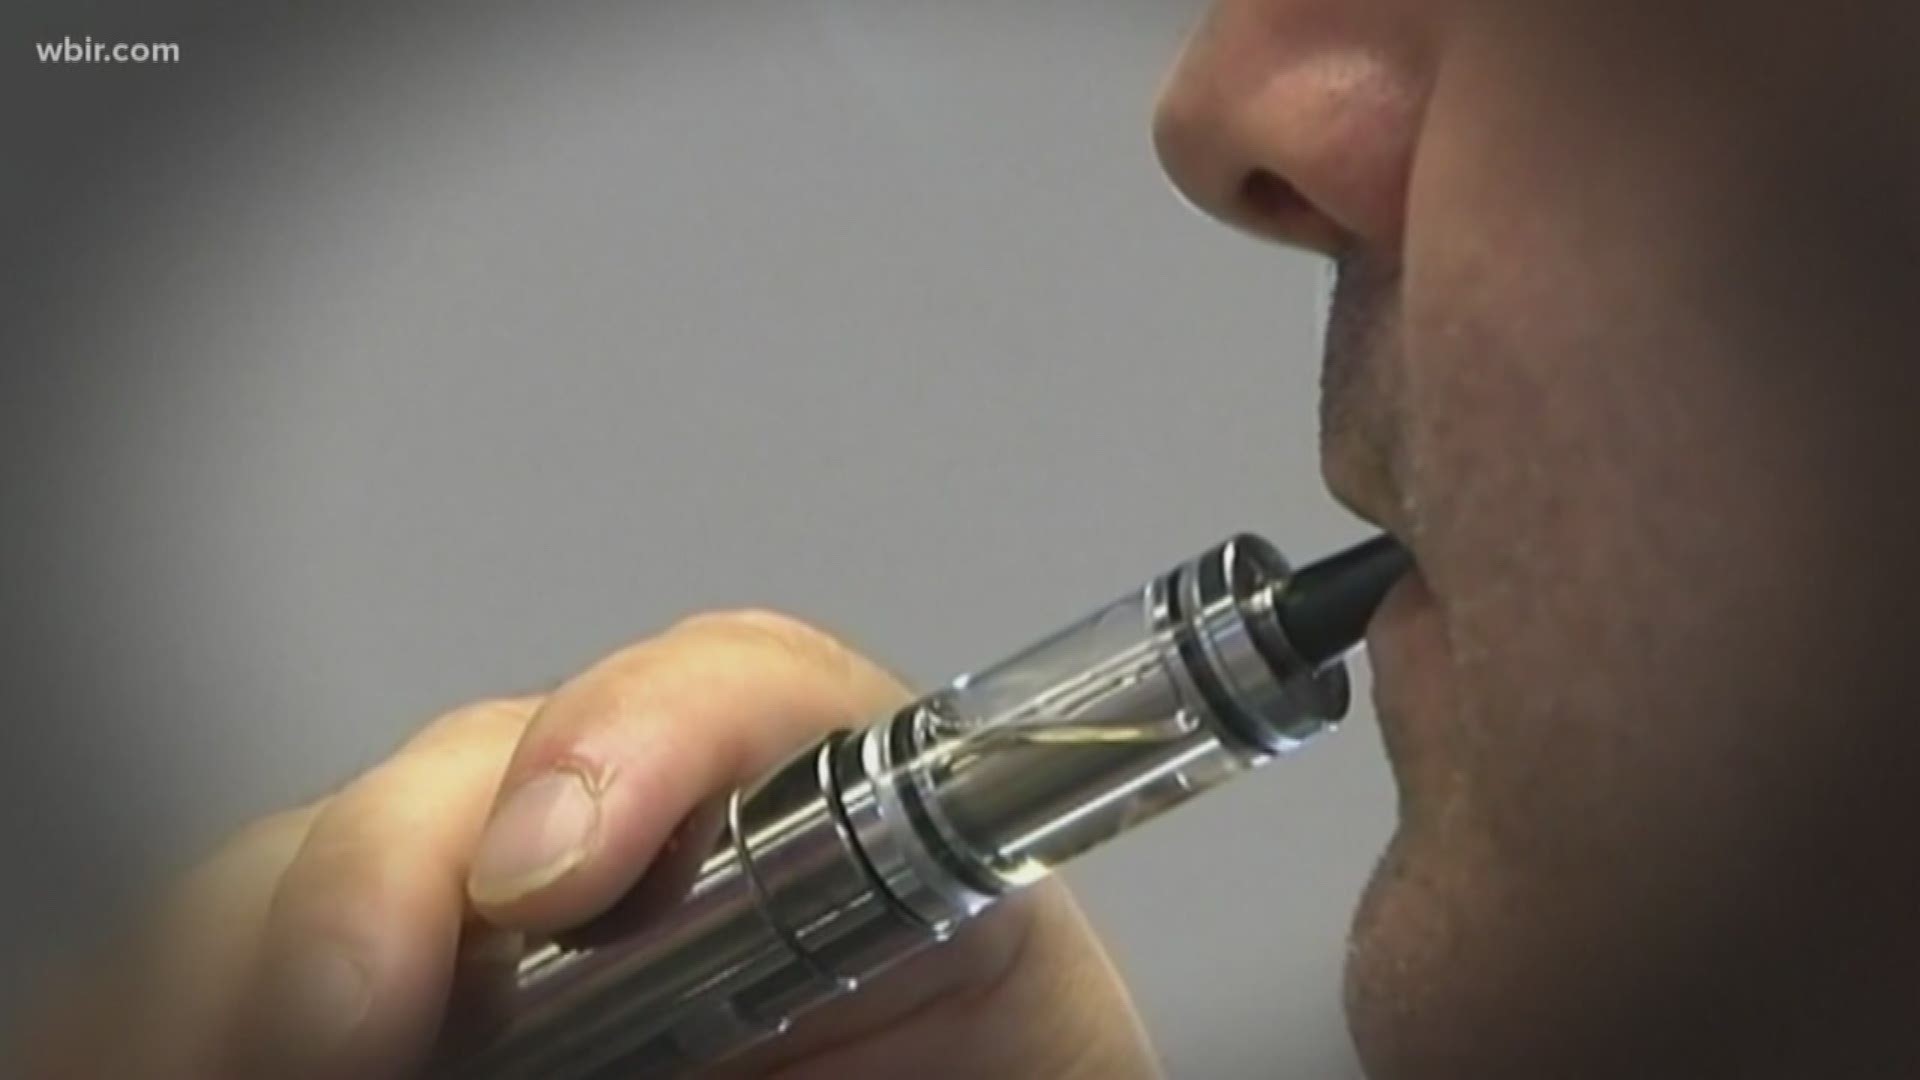 The bill they plan to file would help the state understand just how widespread vaping illness is.